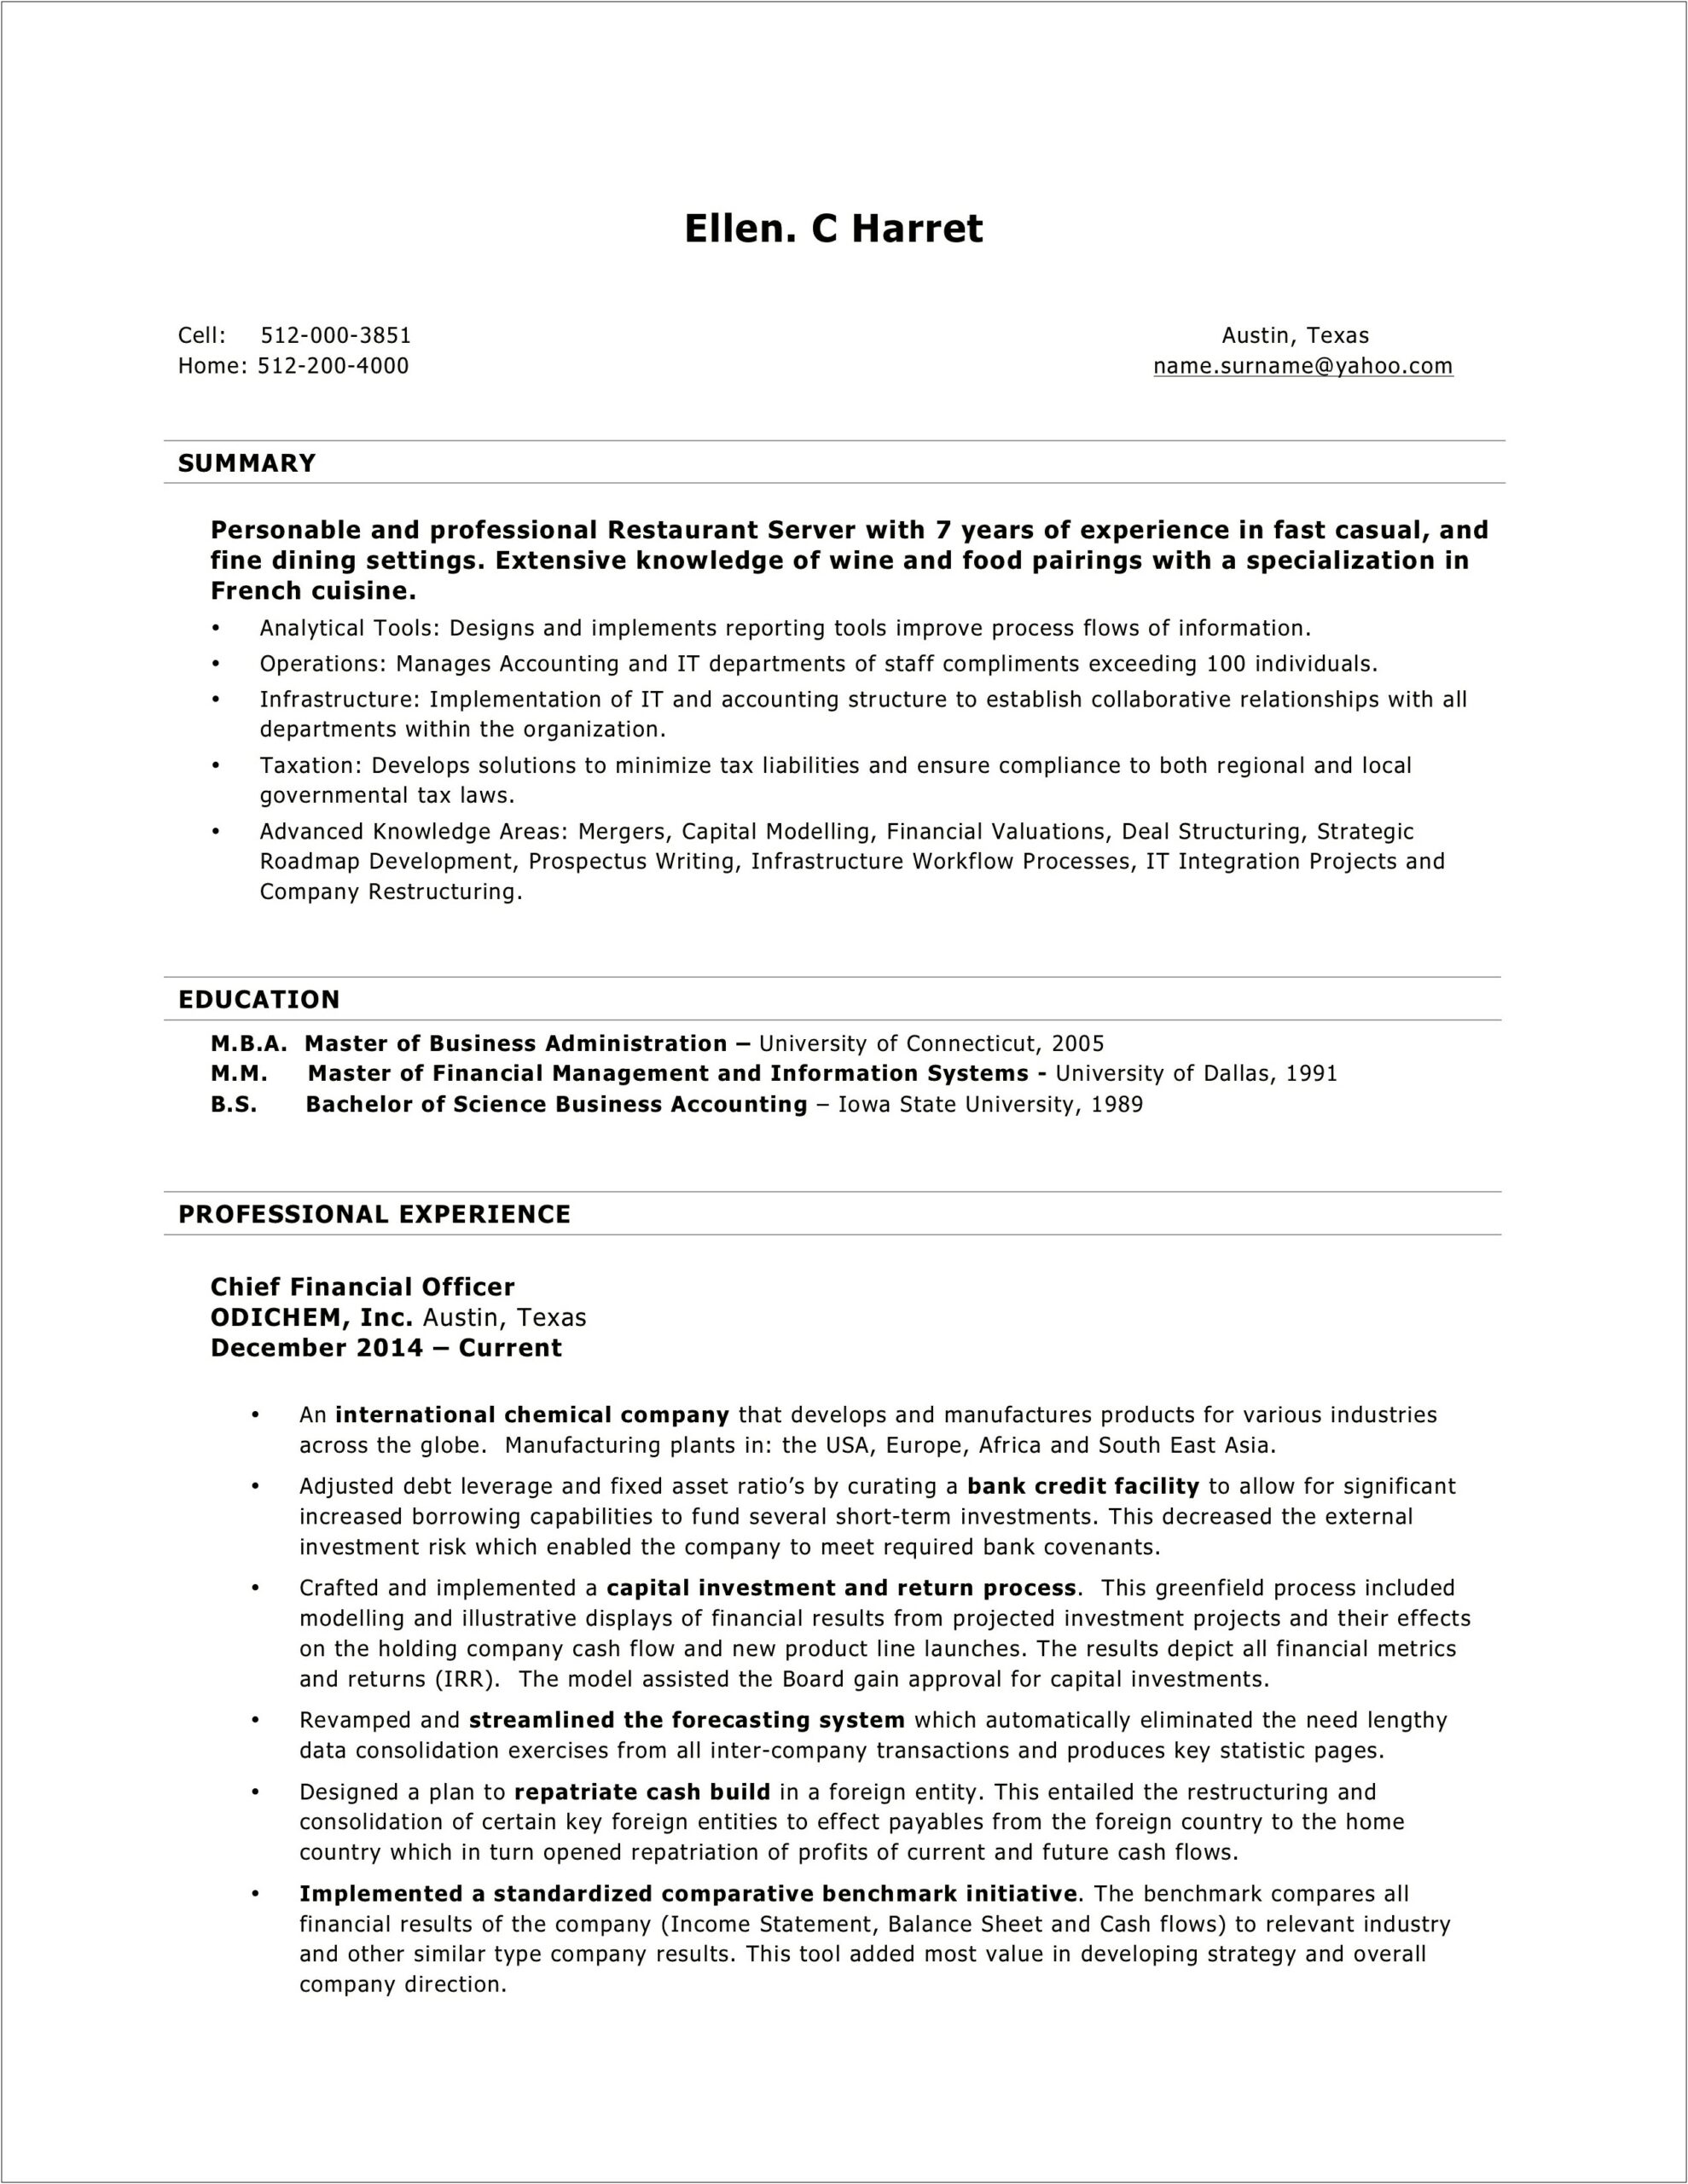 Creating A Professional Resume In Word